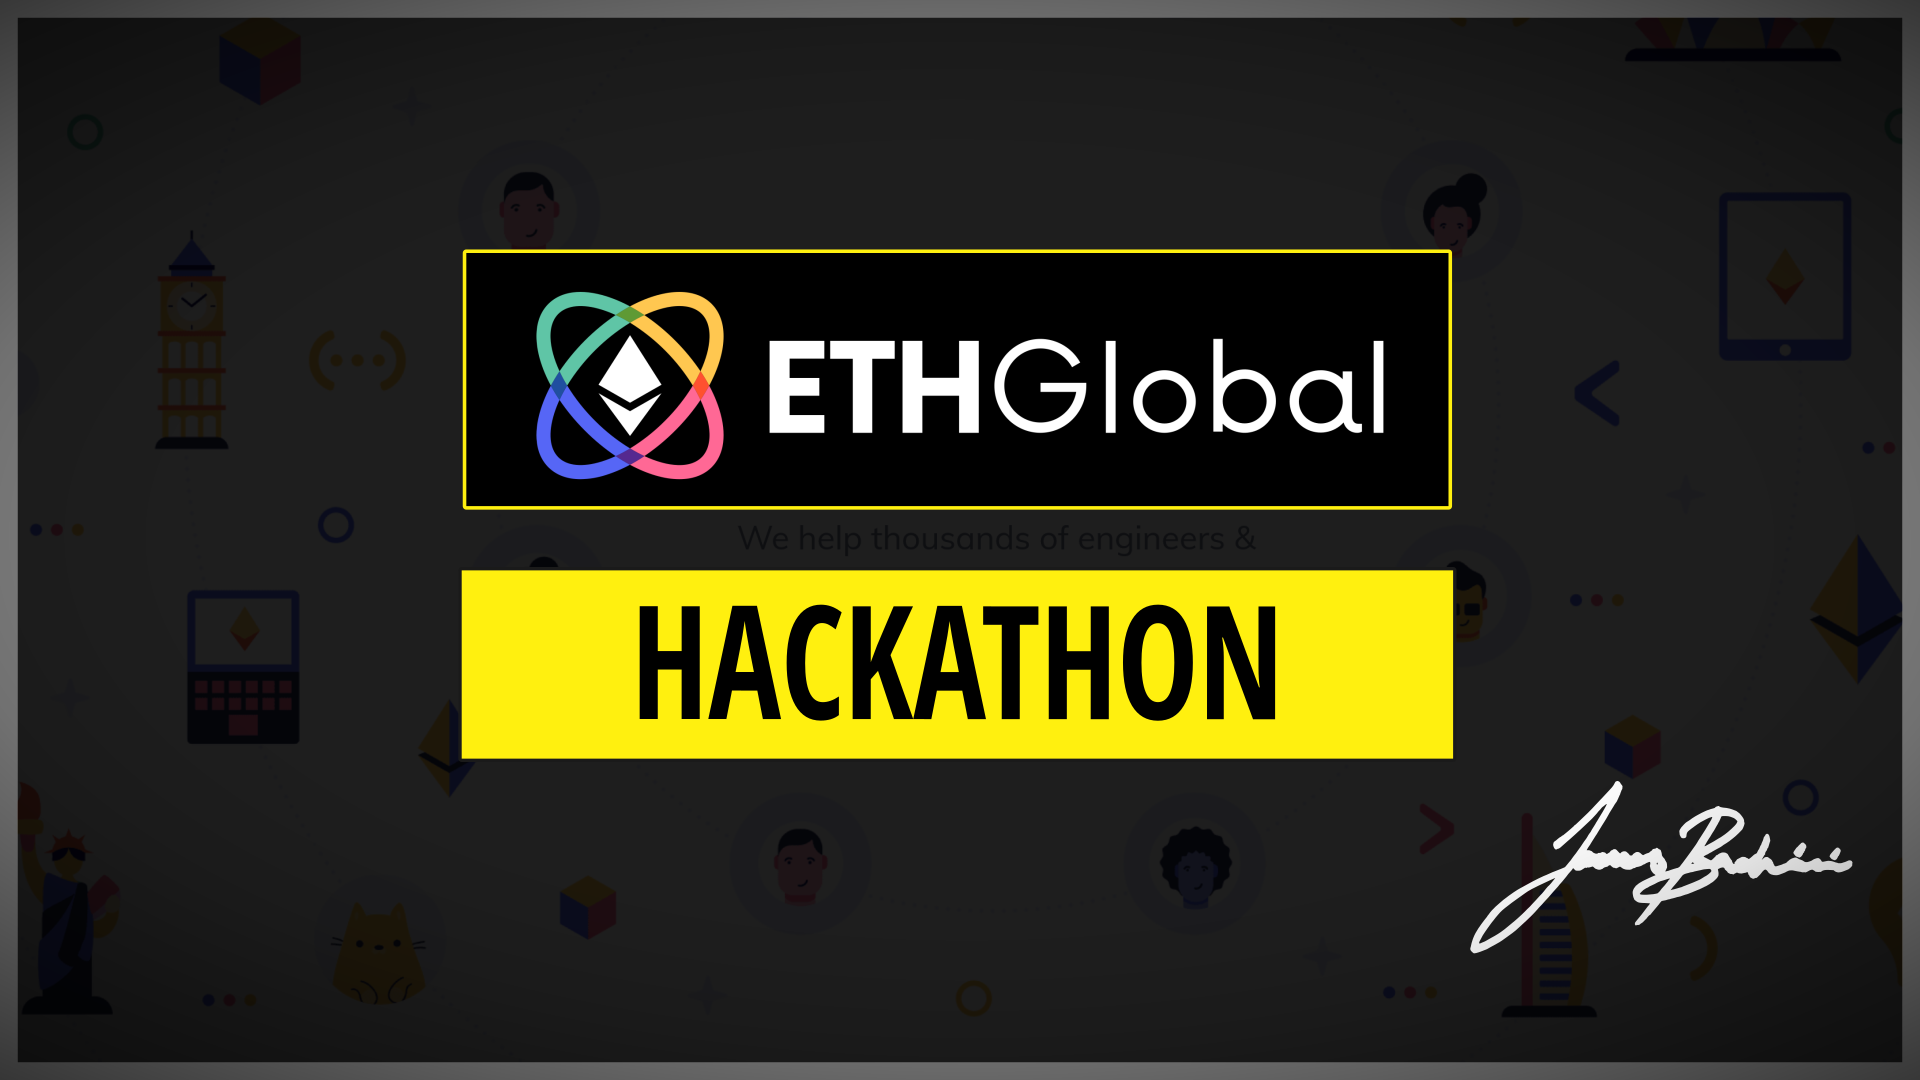 EthGlobal Hackathon | Winning $4300 And Advice For Future Participants